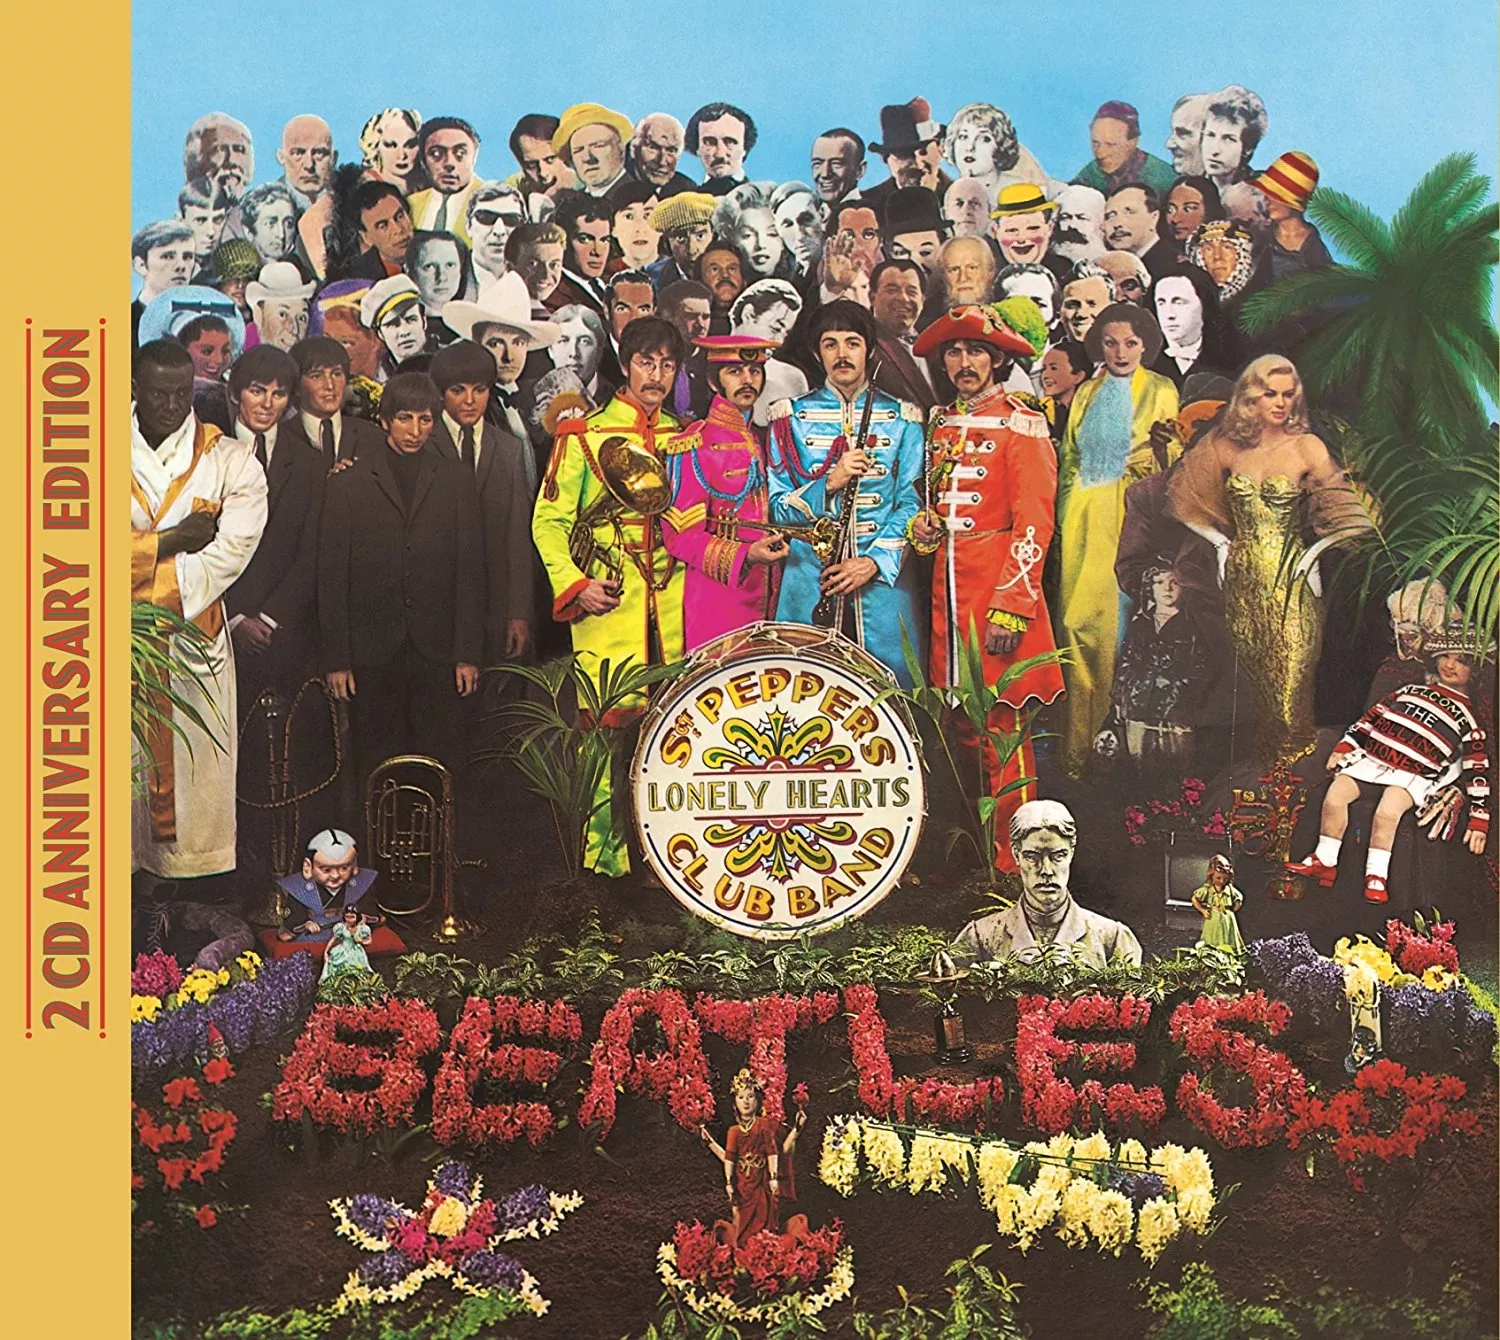 Sgt. Pepper’s Lonely Hearts Club Band, 2 CD Anniversary Edition - The Beatles